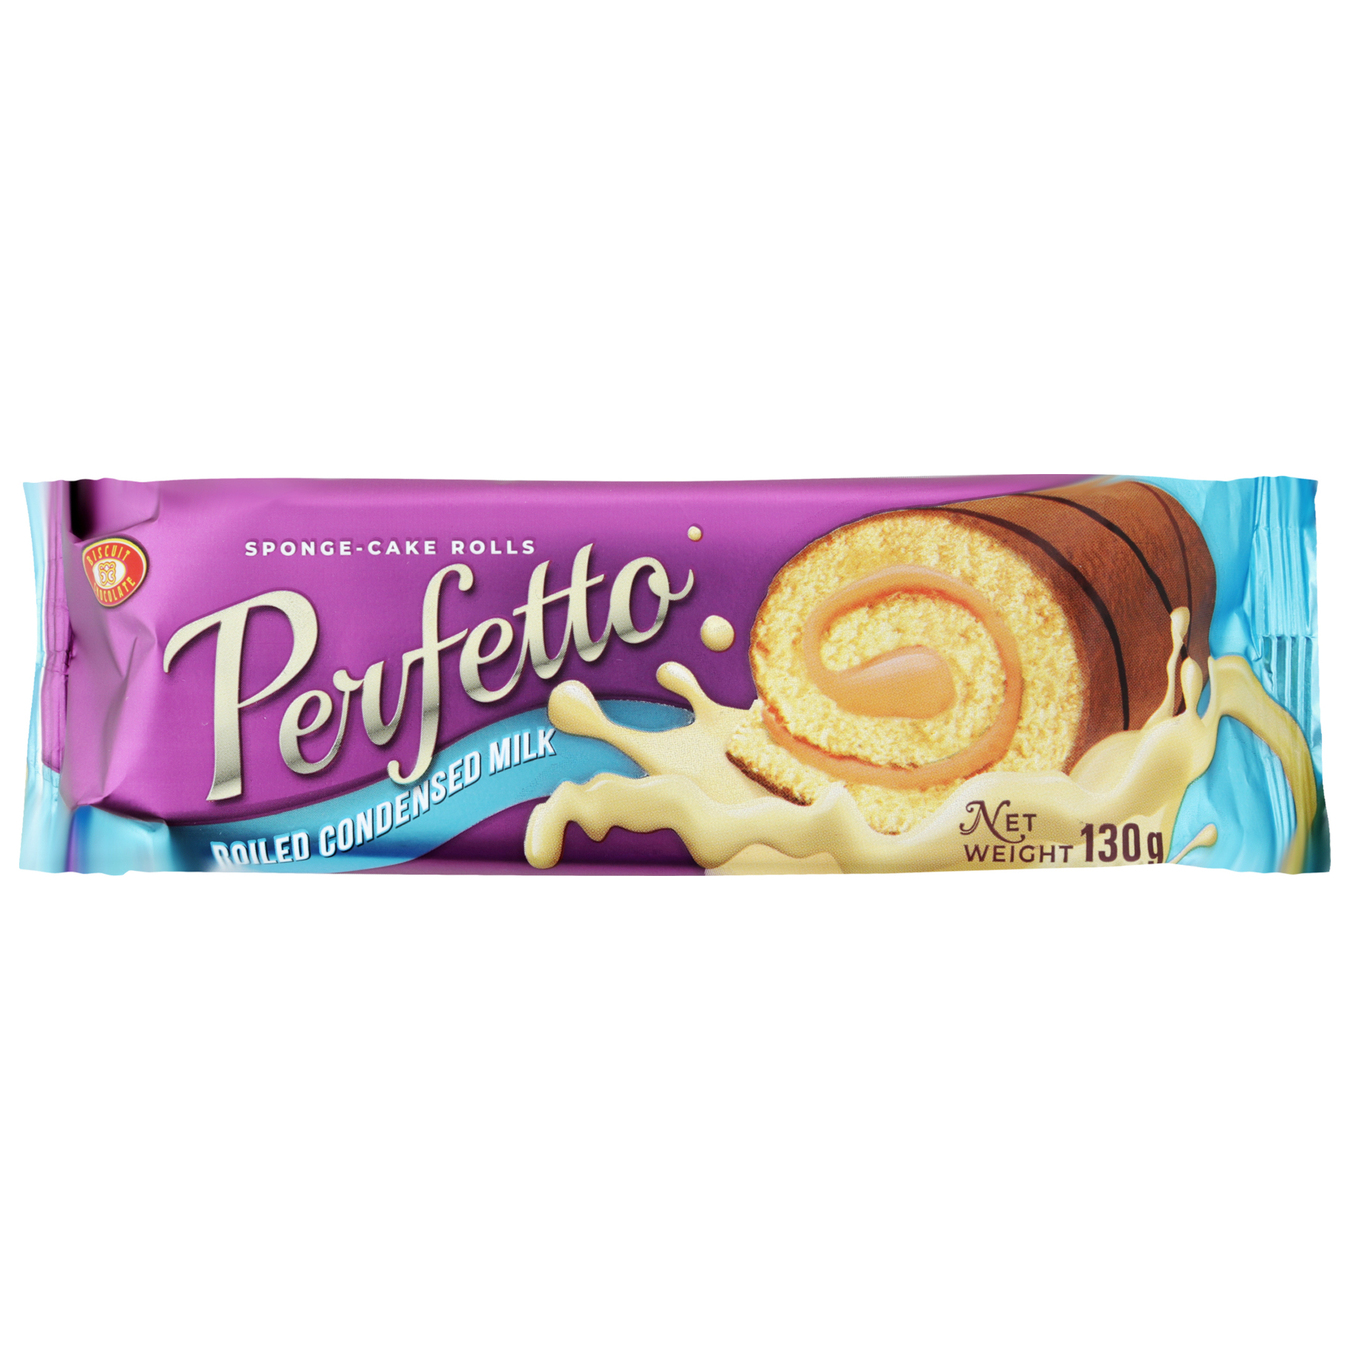 Biscuit roll KhBF perfetto boiled condensed milk 130g